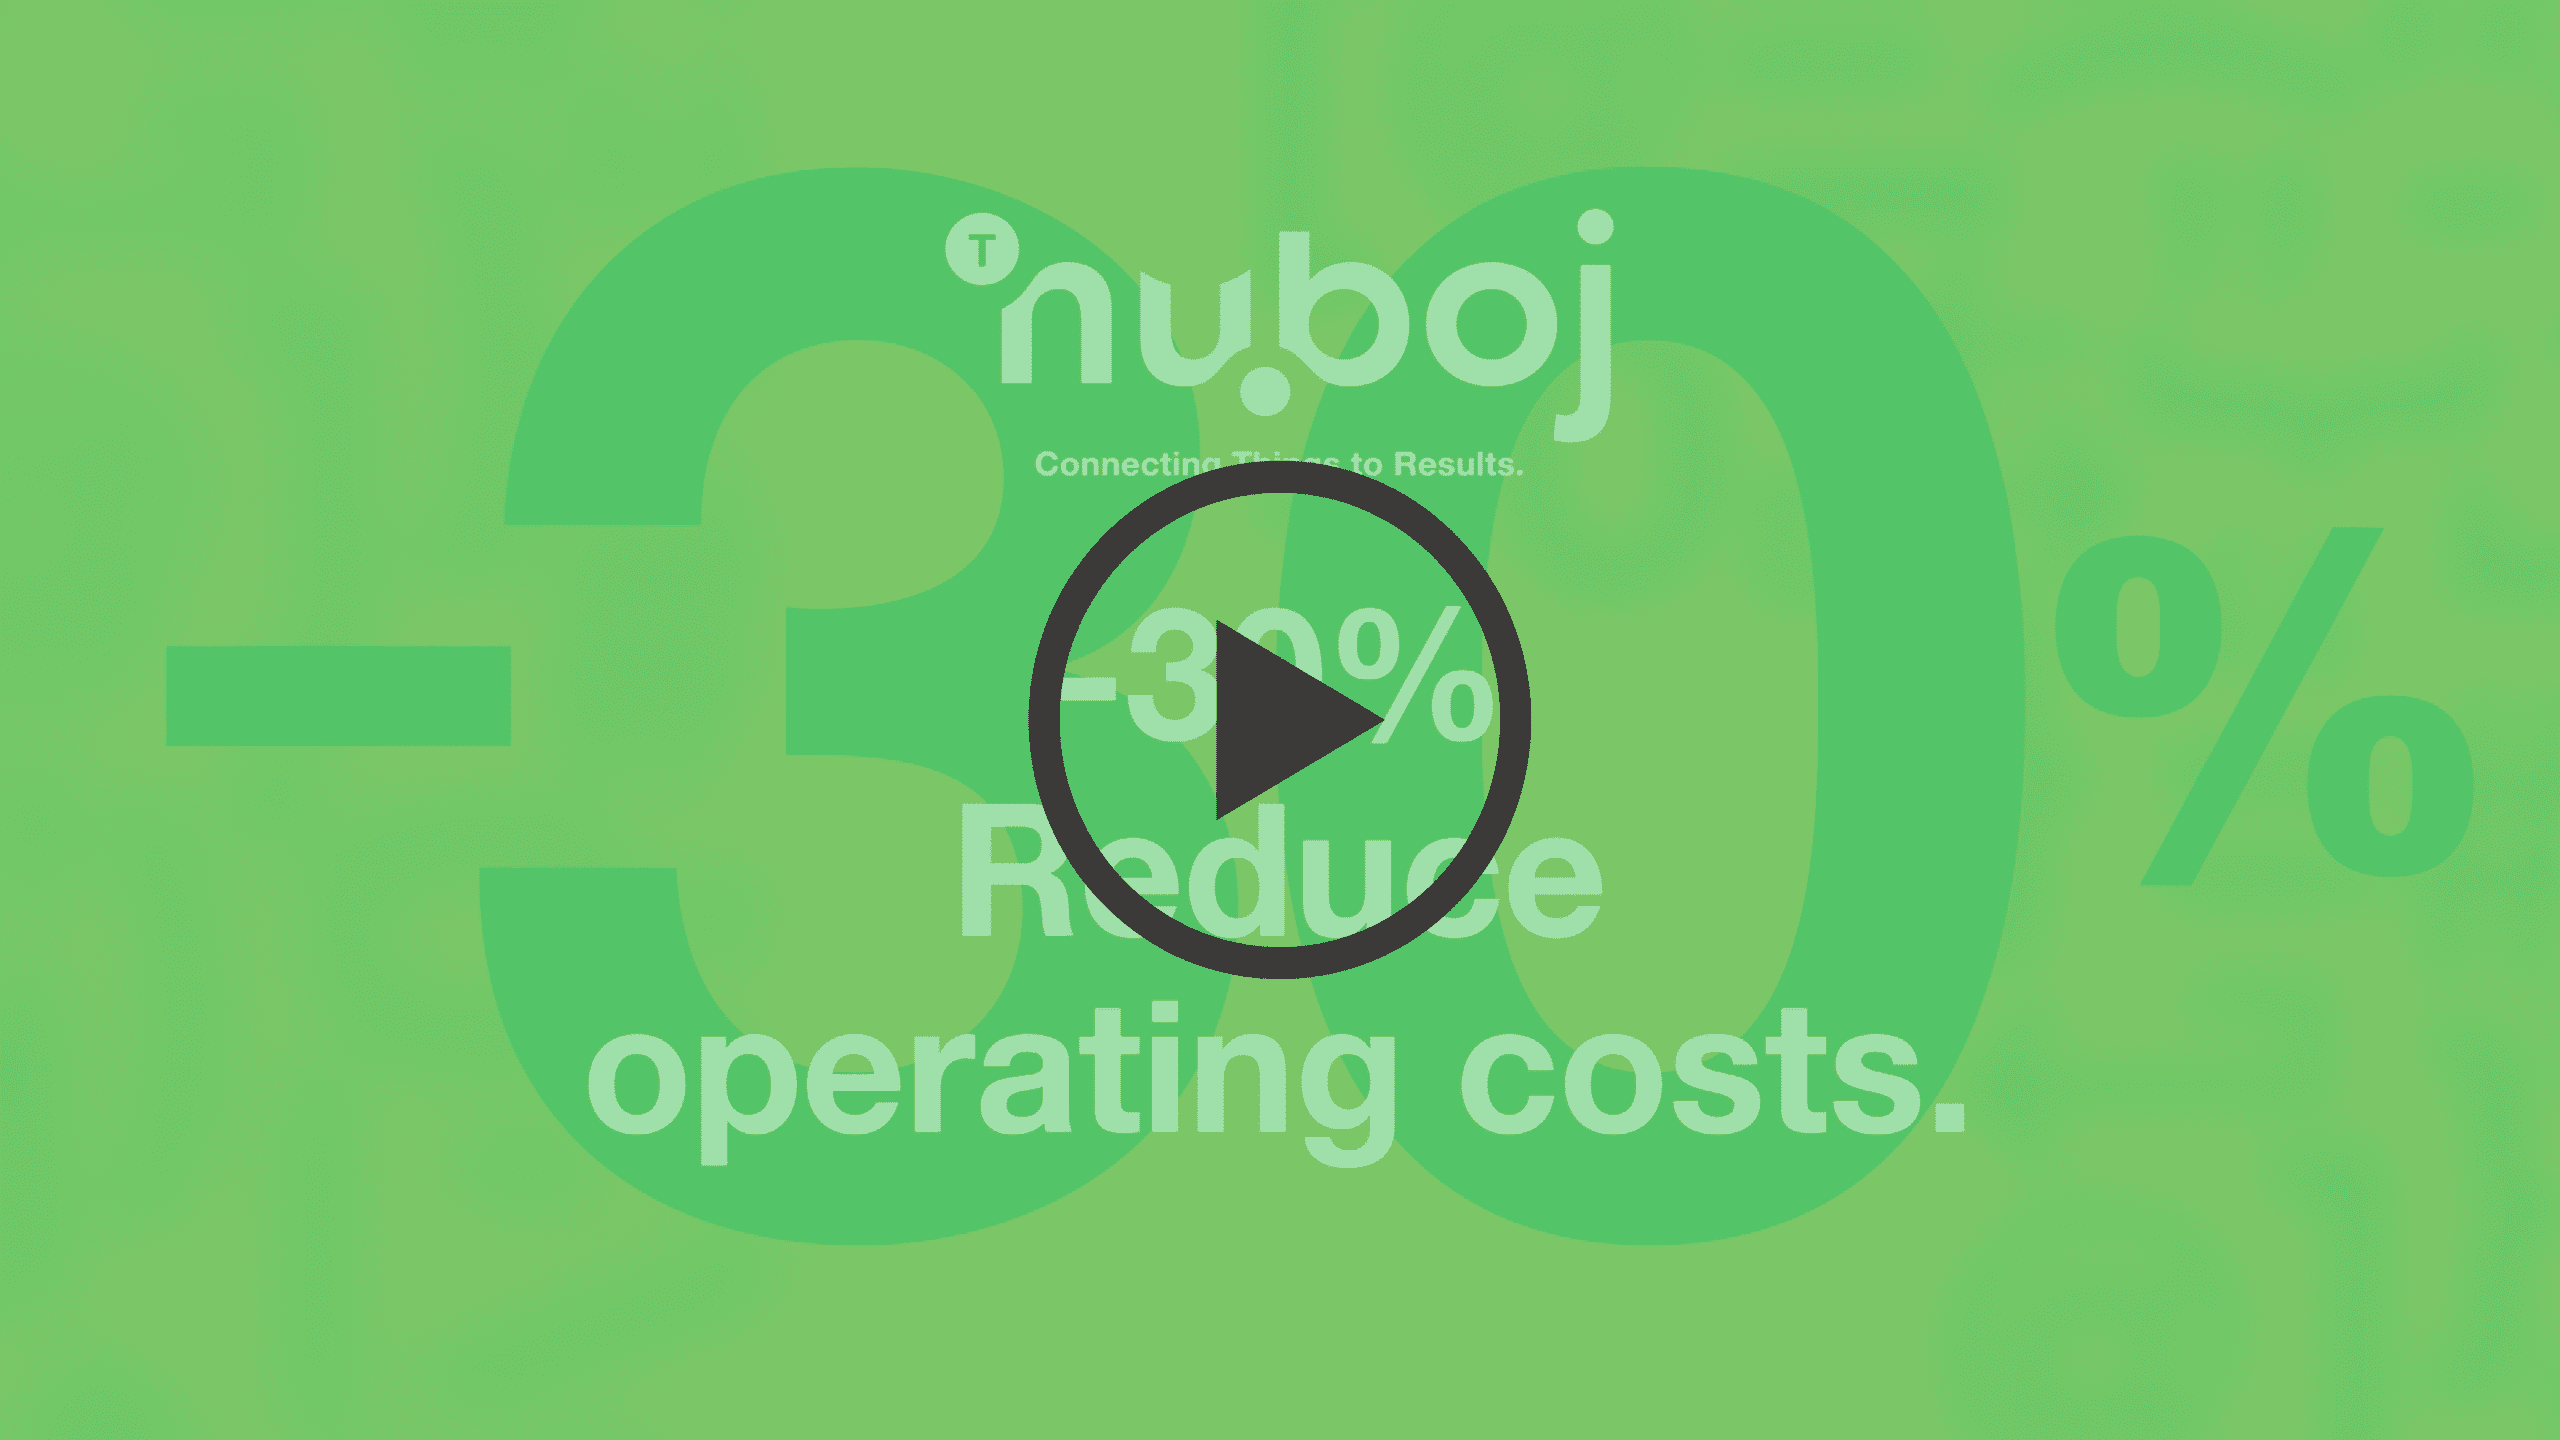 Reduction operating cost